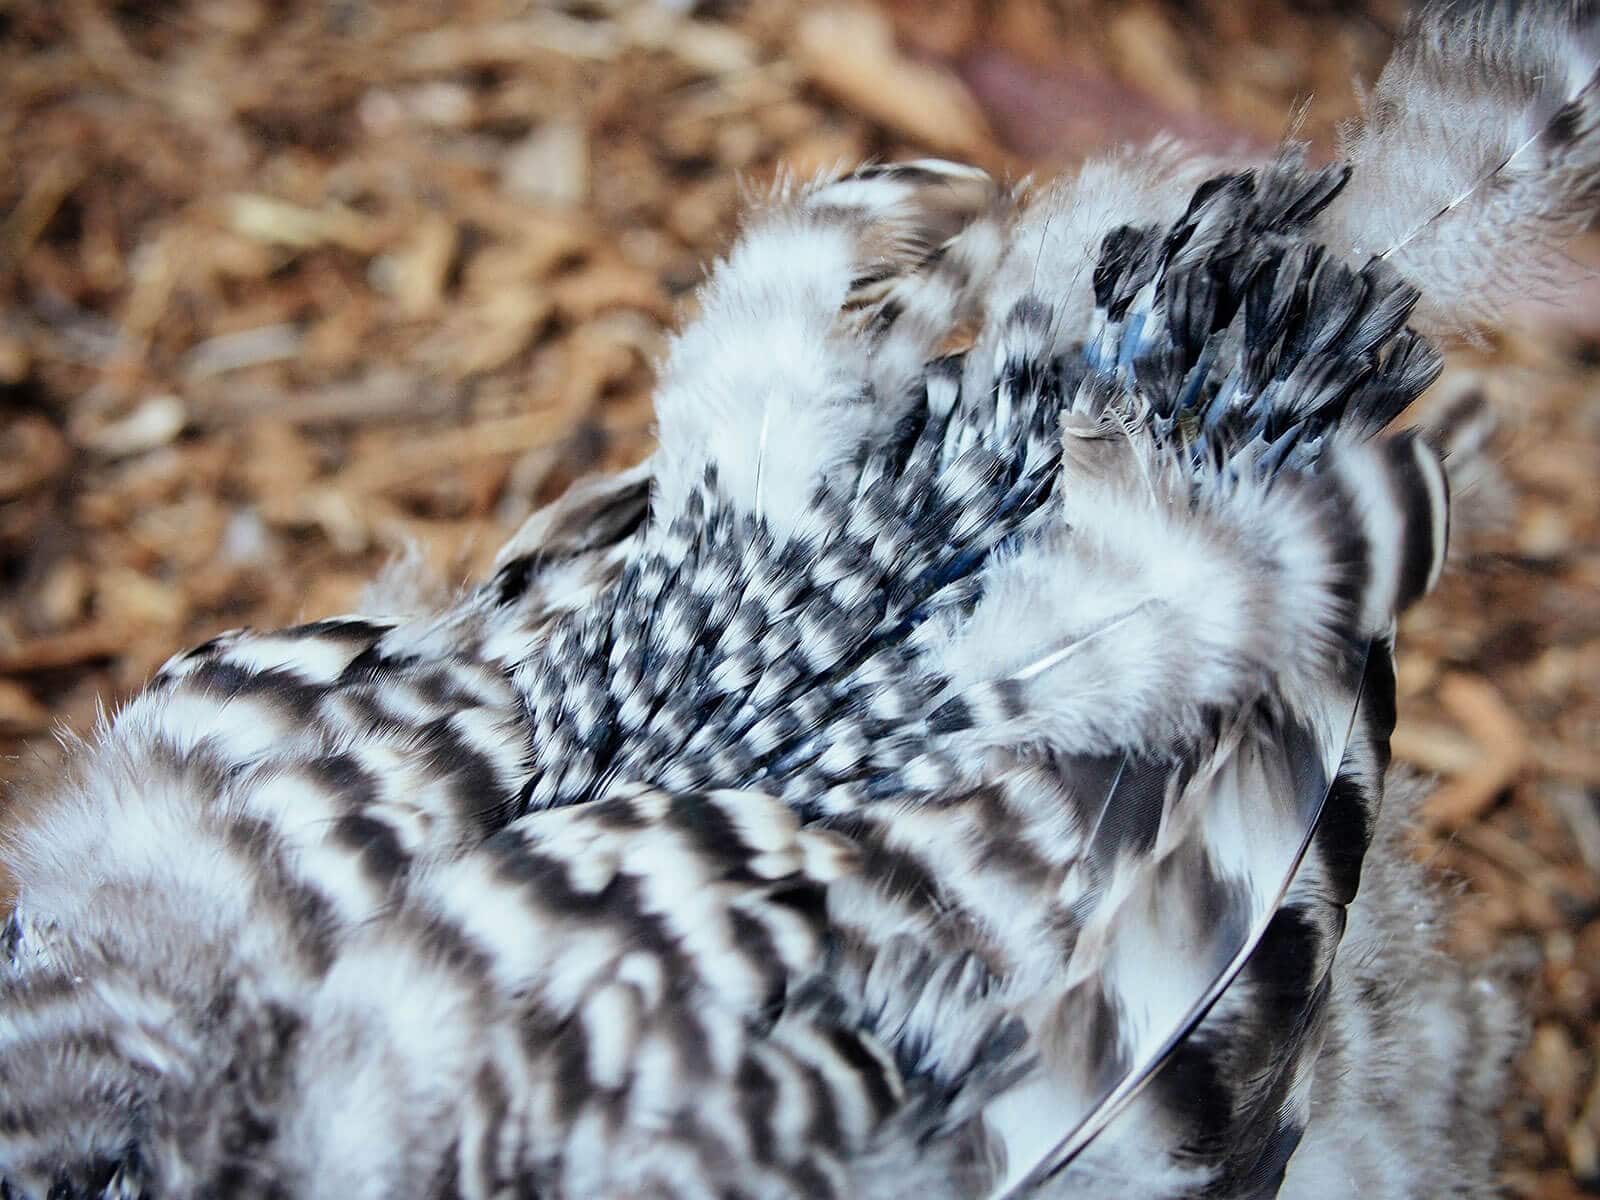 Brand-new feathers on a chicken's tail